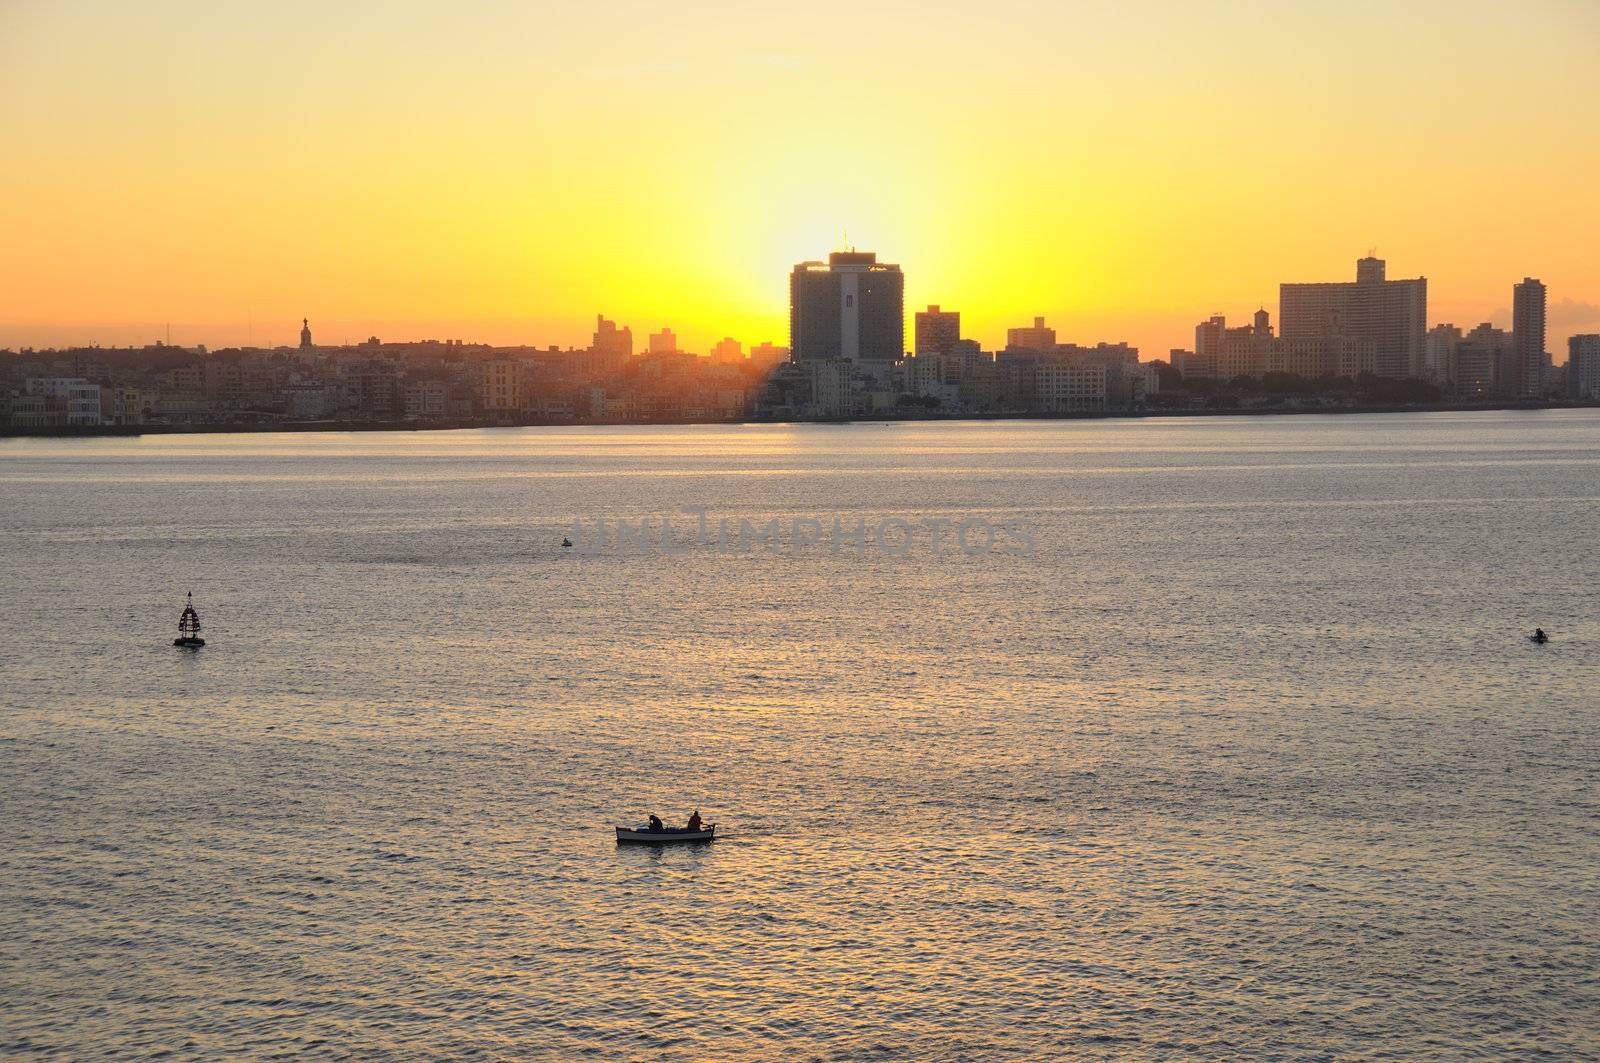 A view of havana skyline at sunset with fishing boat on the front